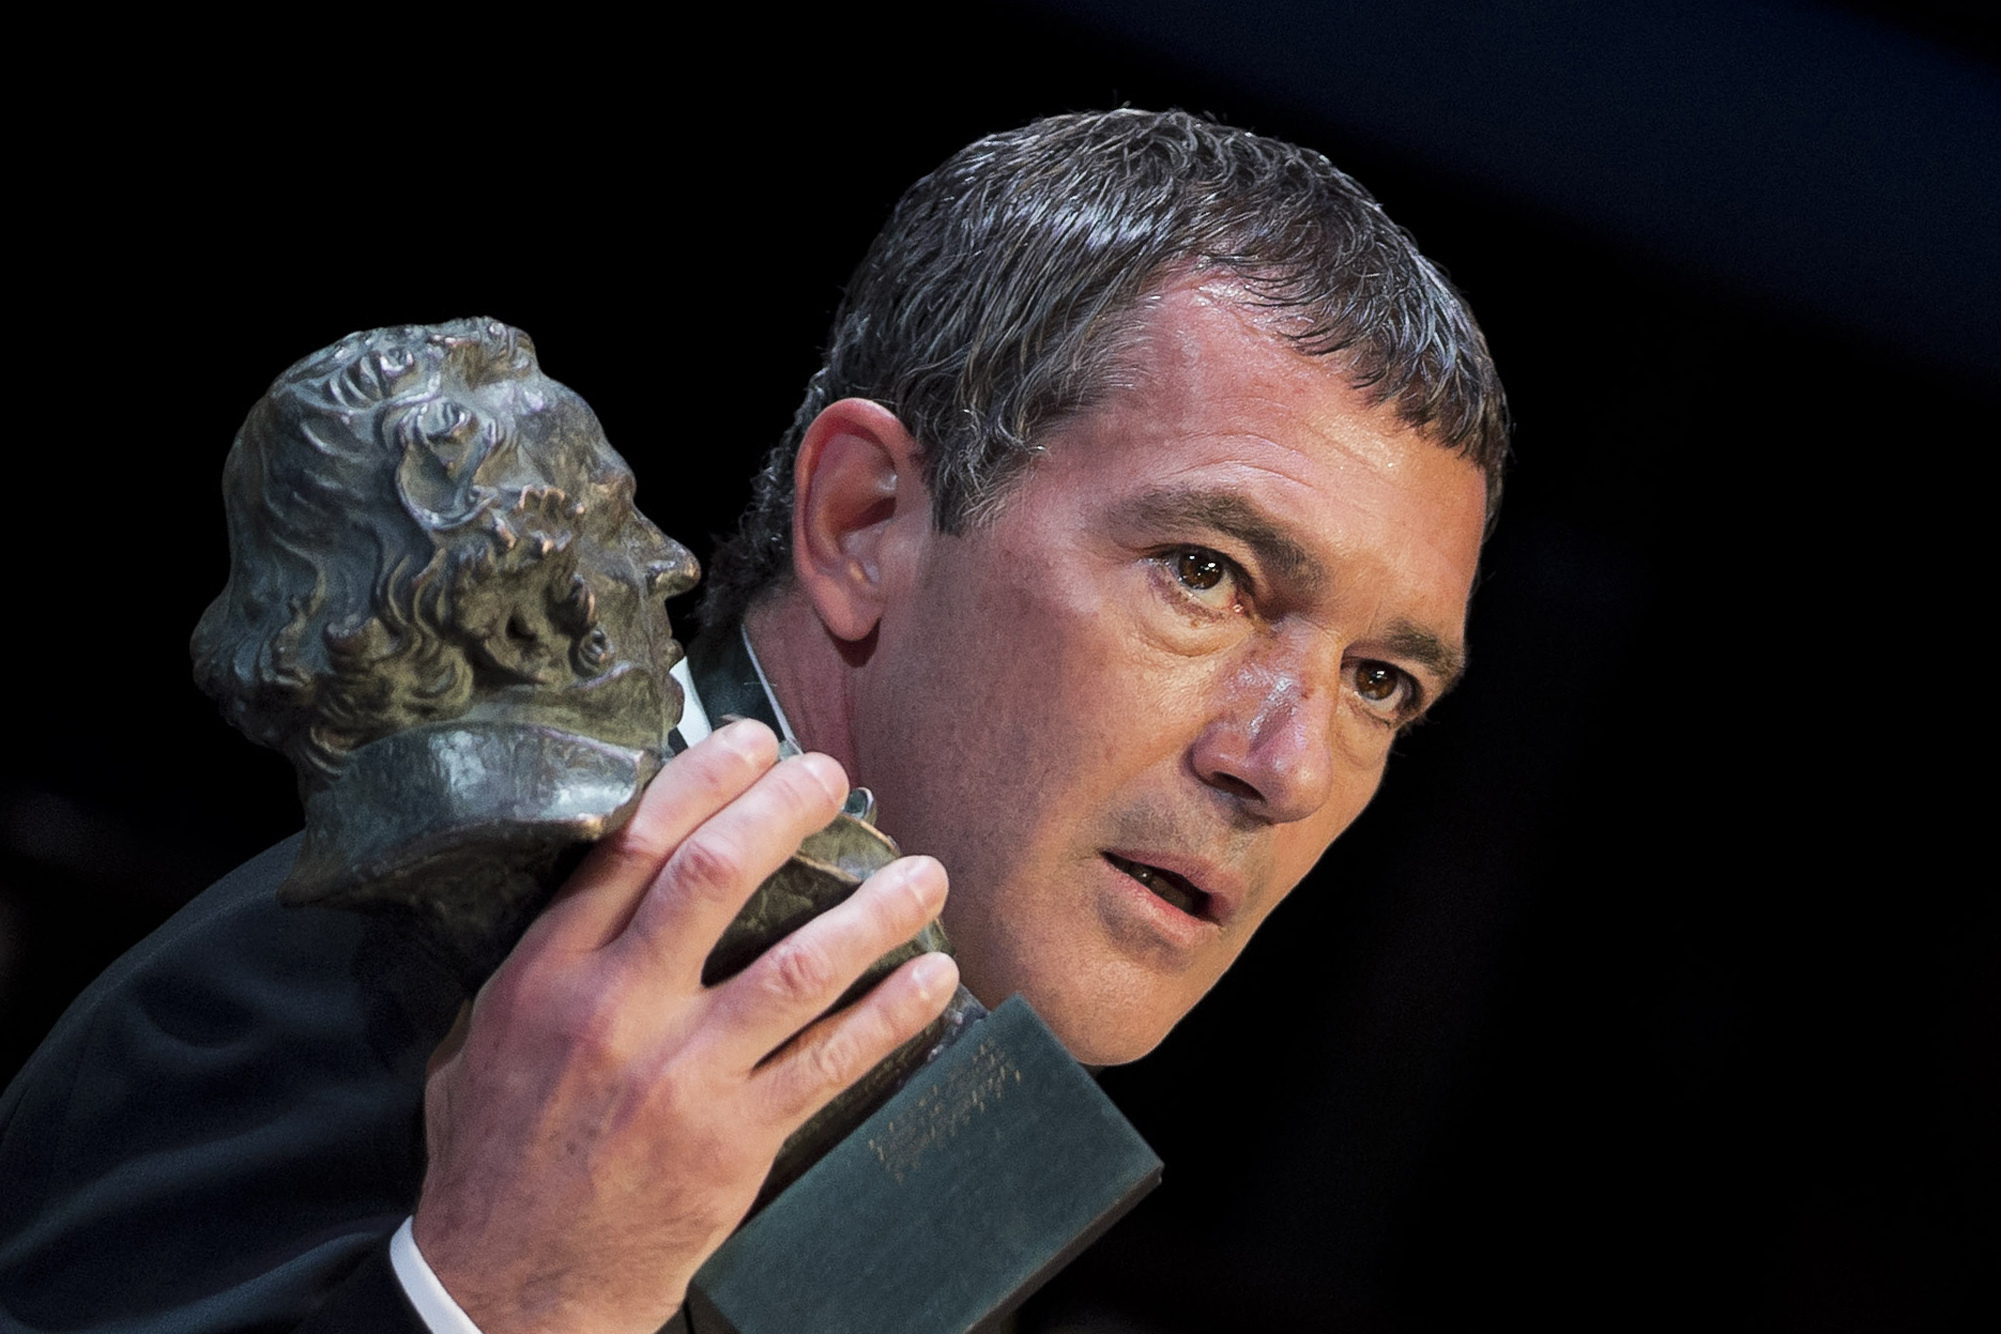 FILE - In this Feb. 7, 2015 file photo, Spanish actor Antonio Banderas holds his Honorific Goya trophy for his career, at the Goya Film Awards Ceremony in Madrid, Spain. Antonio Banderas says he has recovered from a heart attack that he had in January 2017. (AP Photo/Daniel Ochoa de Olza, File)